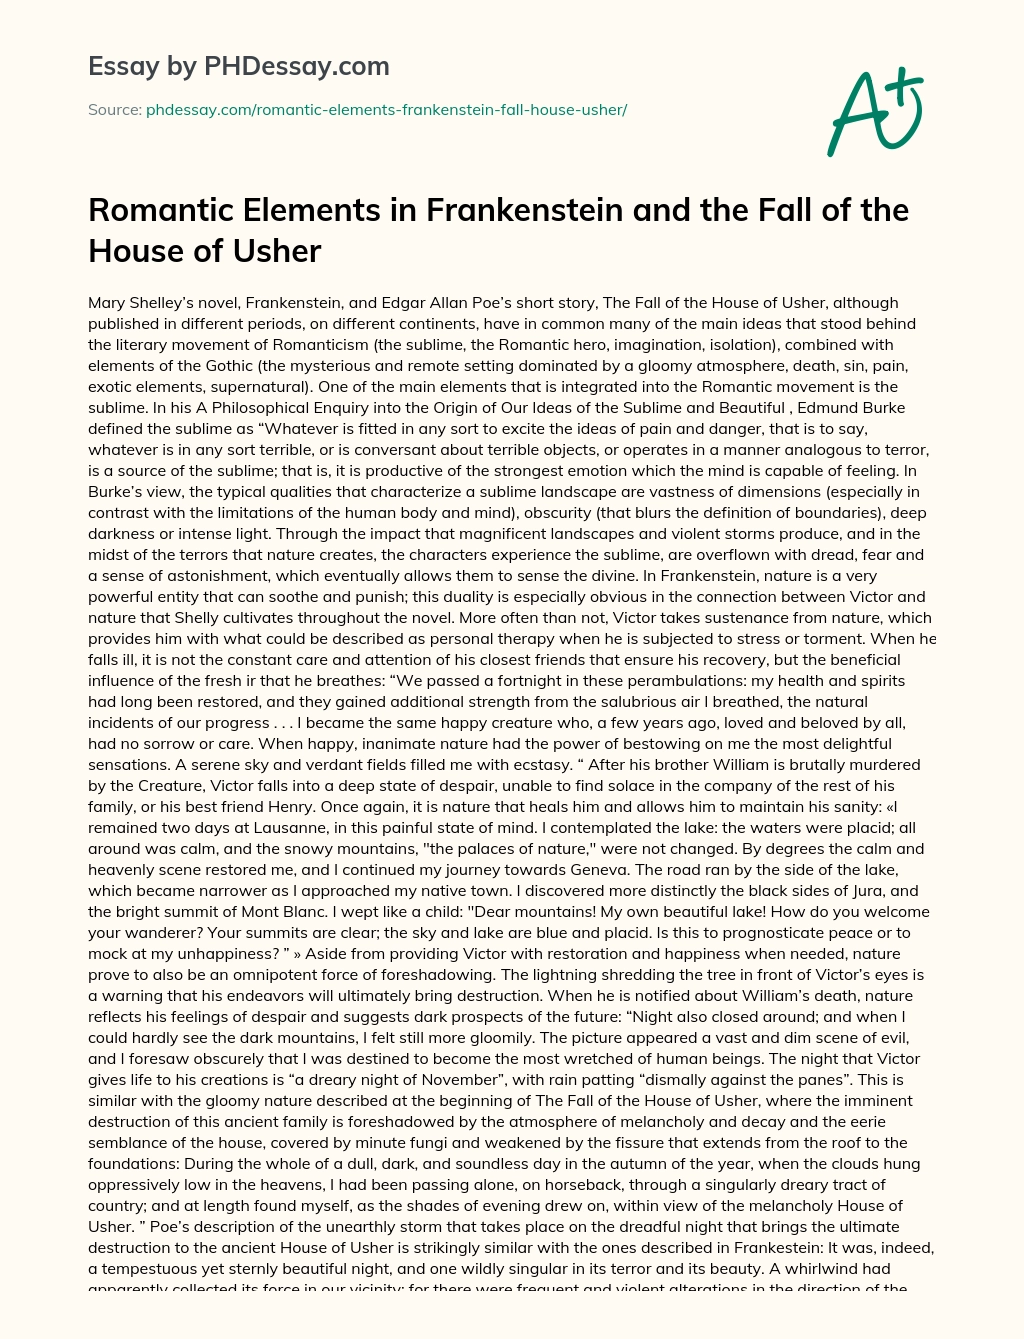 Romantic Elements in Frankenstein and the Fall of the House of Usher essay